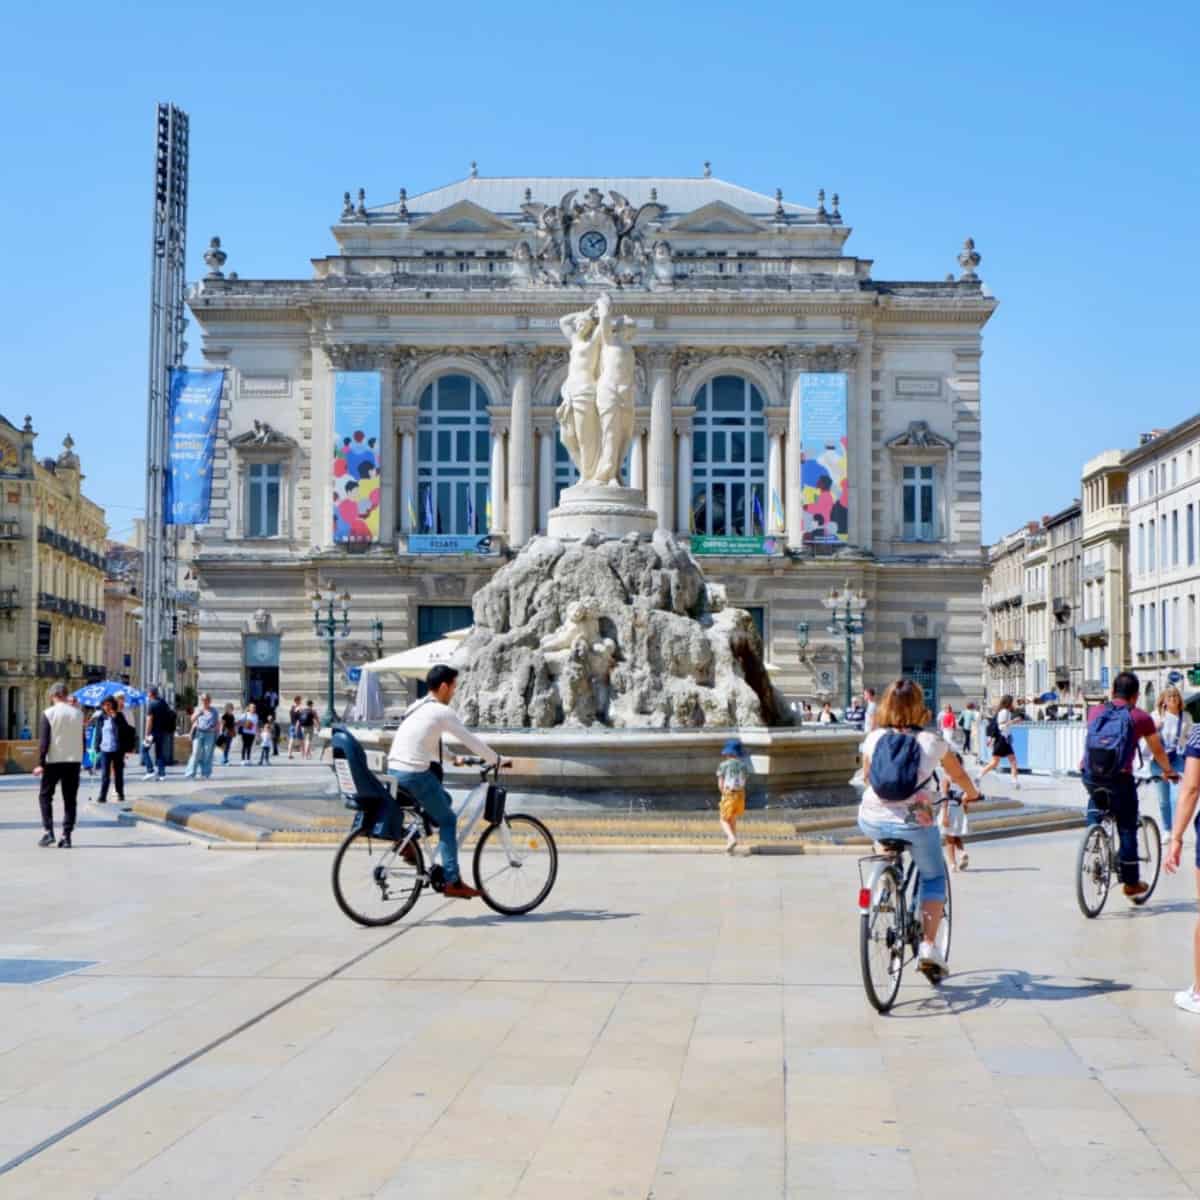 The historic Place de la Comedie in Montpellier France on a sunny day.